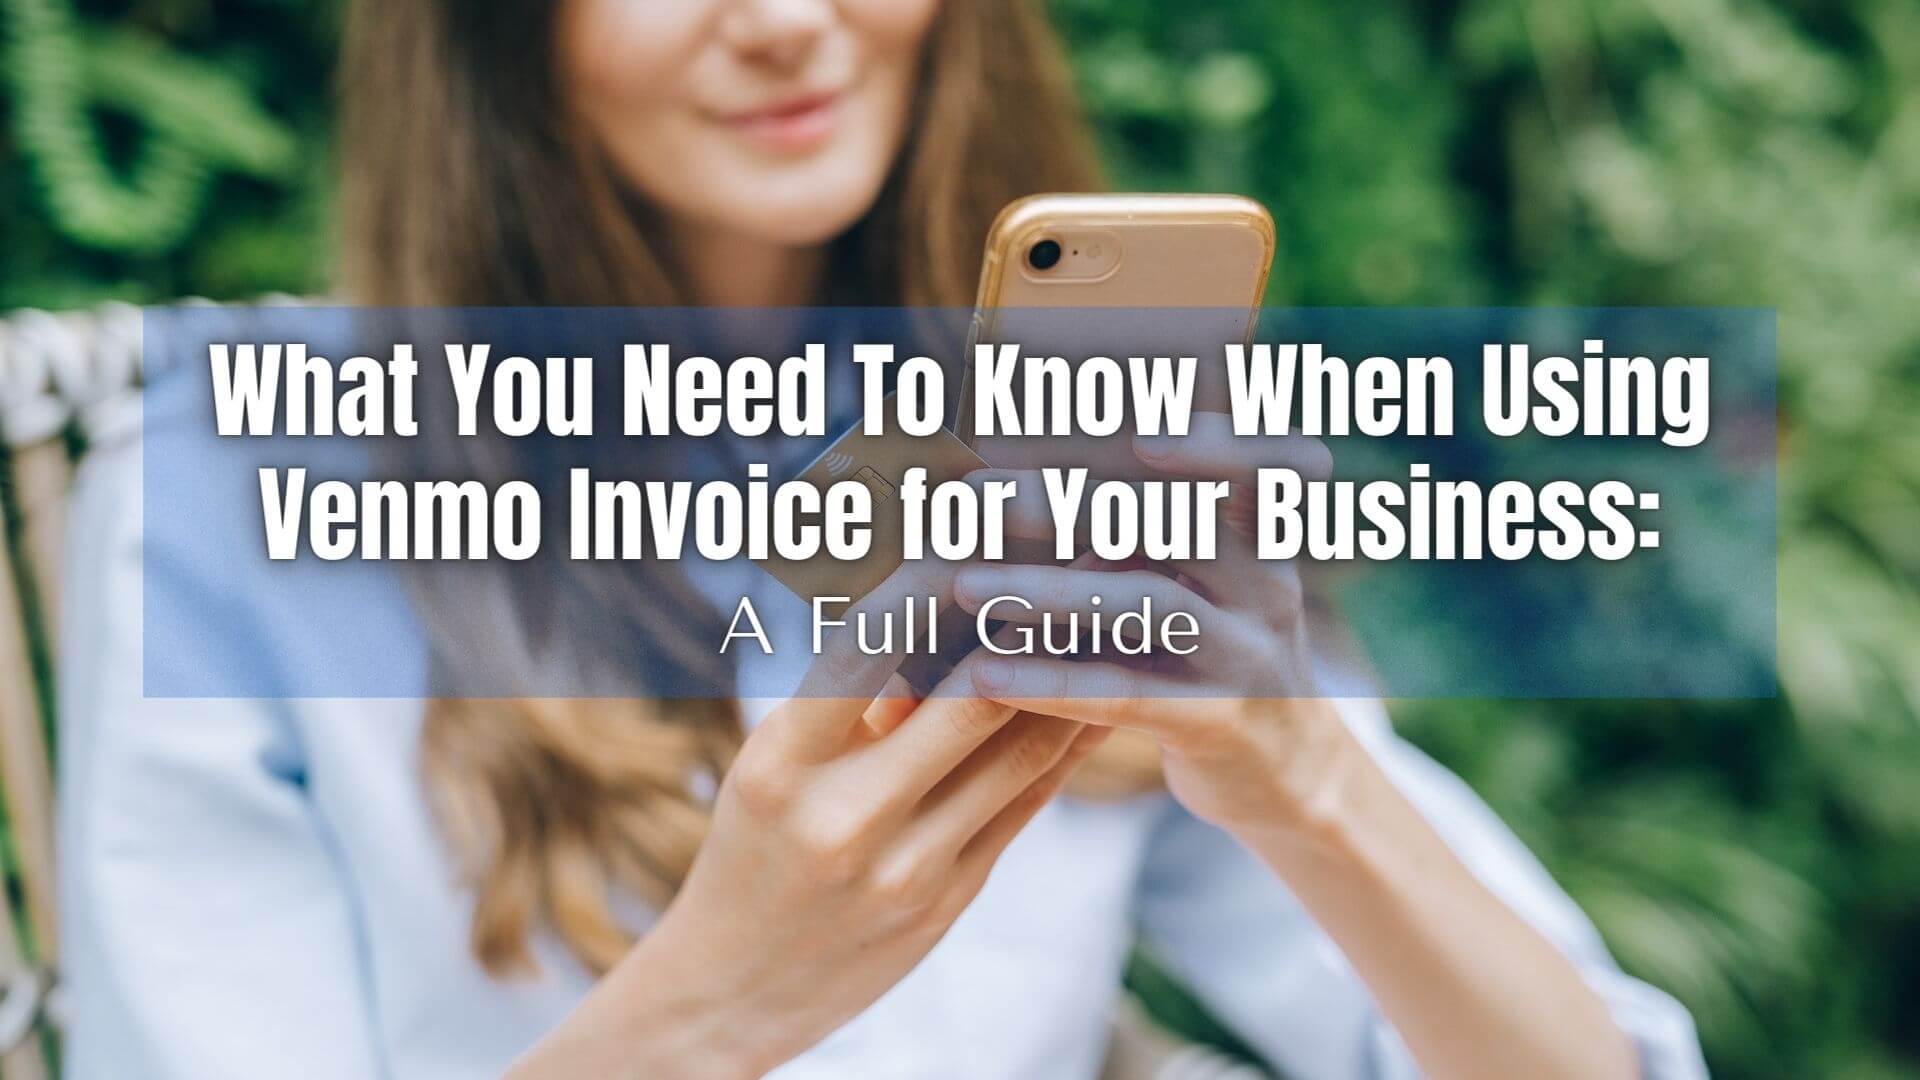 When it comes to accepting payments, Venmo is a useful tool. Here's how you can use Venmo Invoice for your business operations.